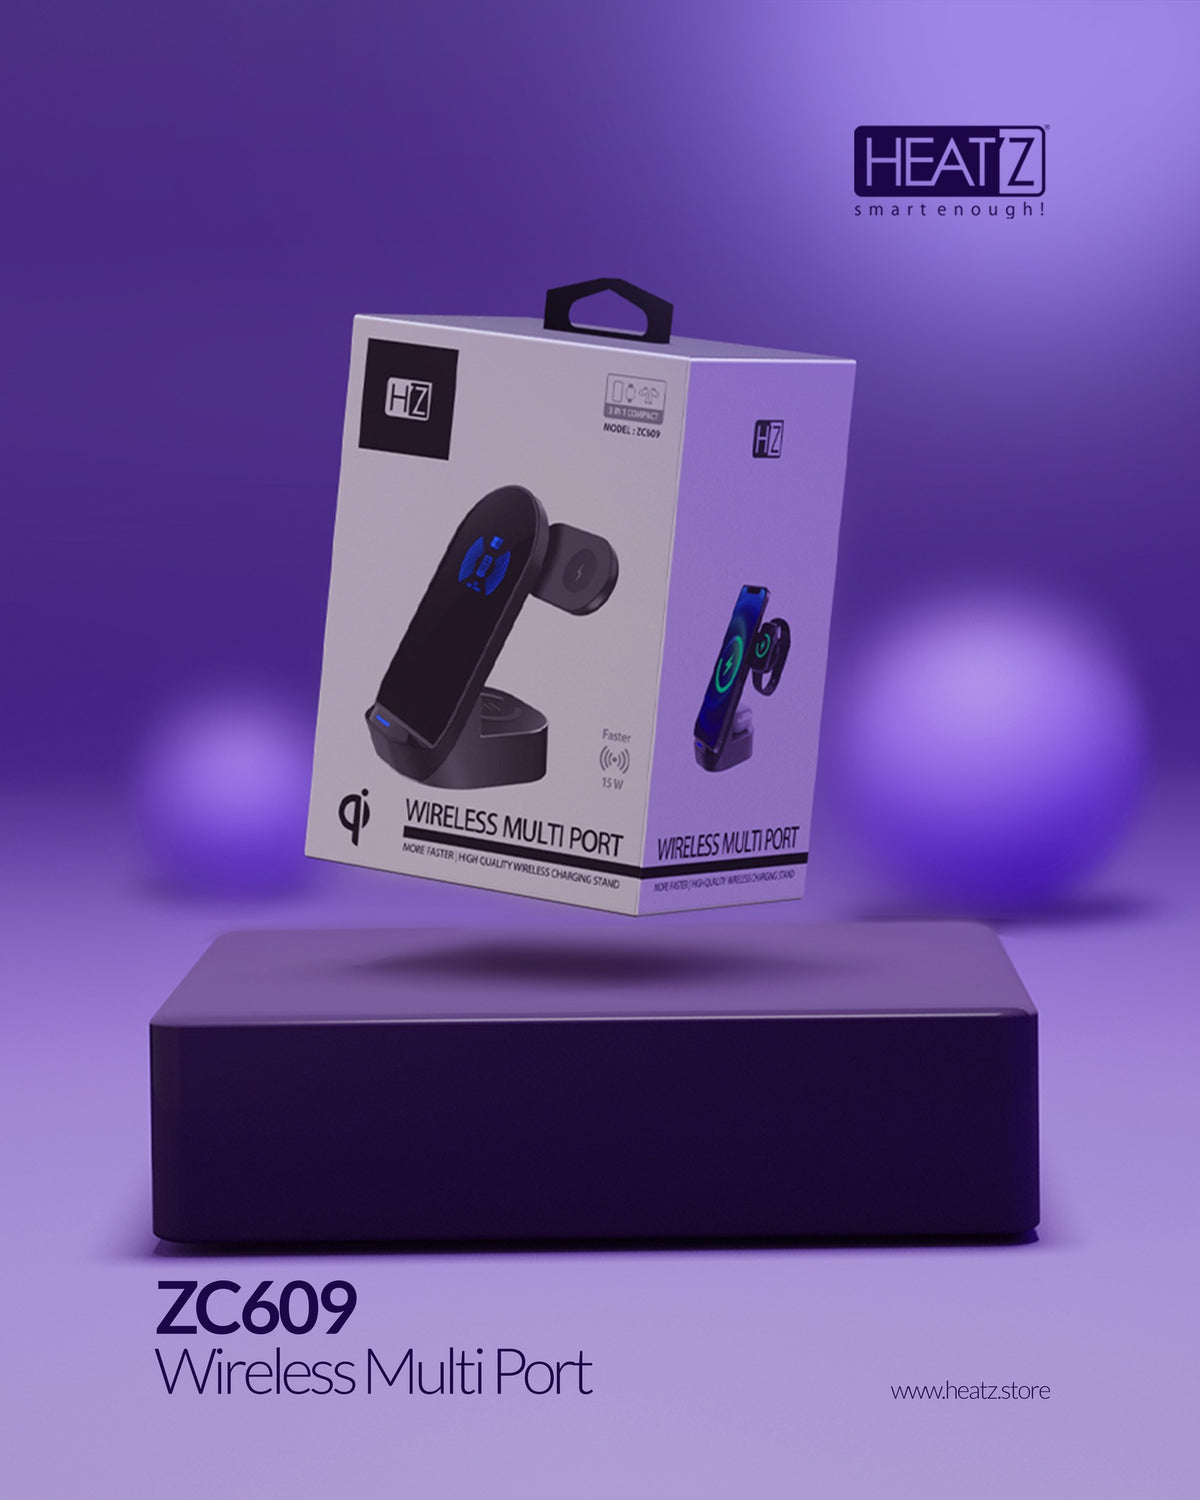 Heatz Wireless Multiport high quality charging stand - 3 In 1 compatible devices.